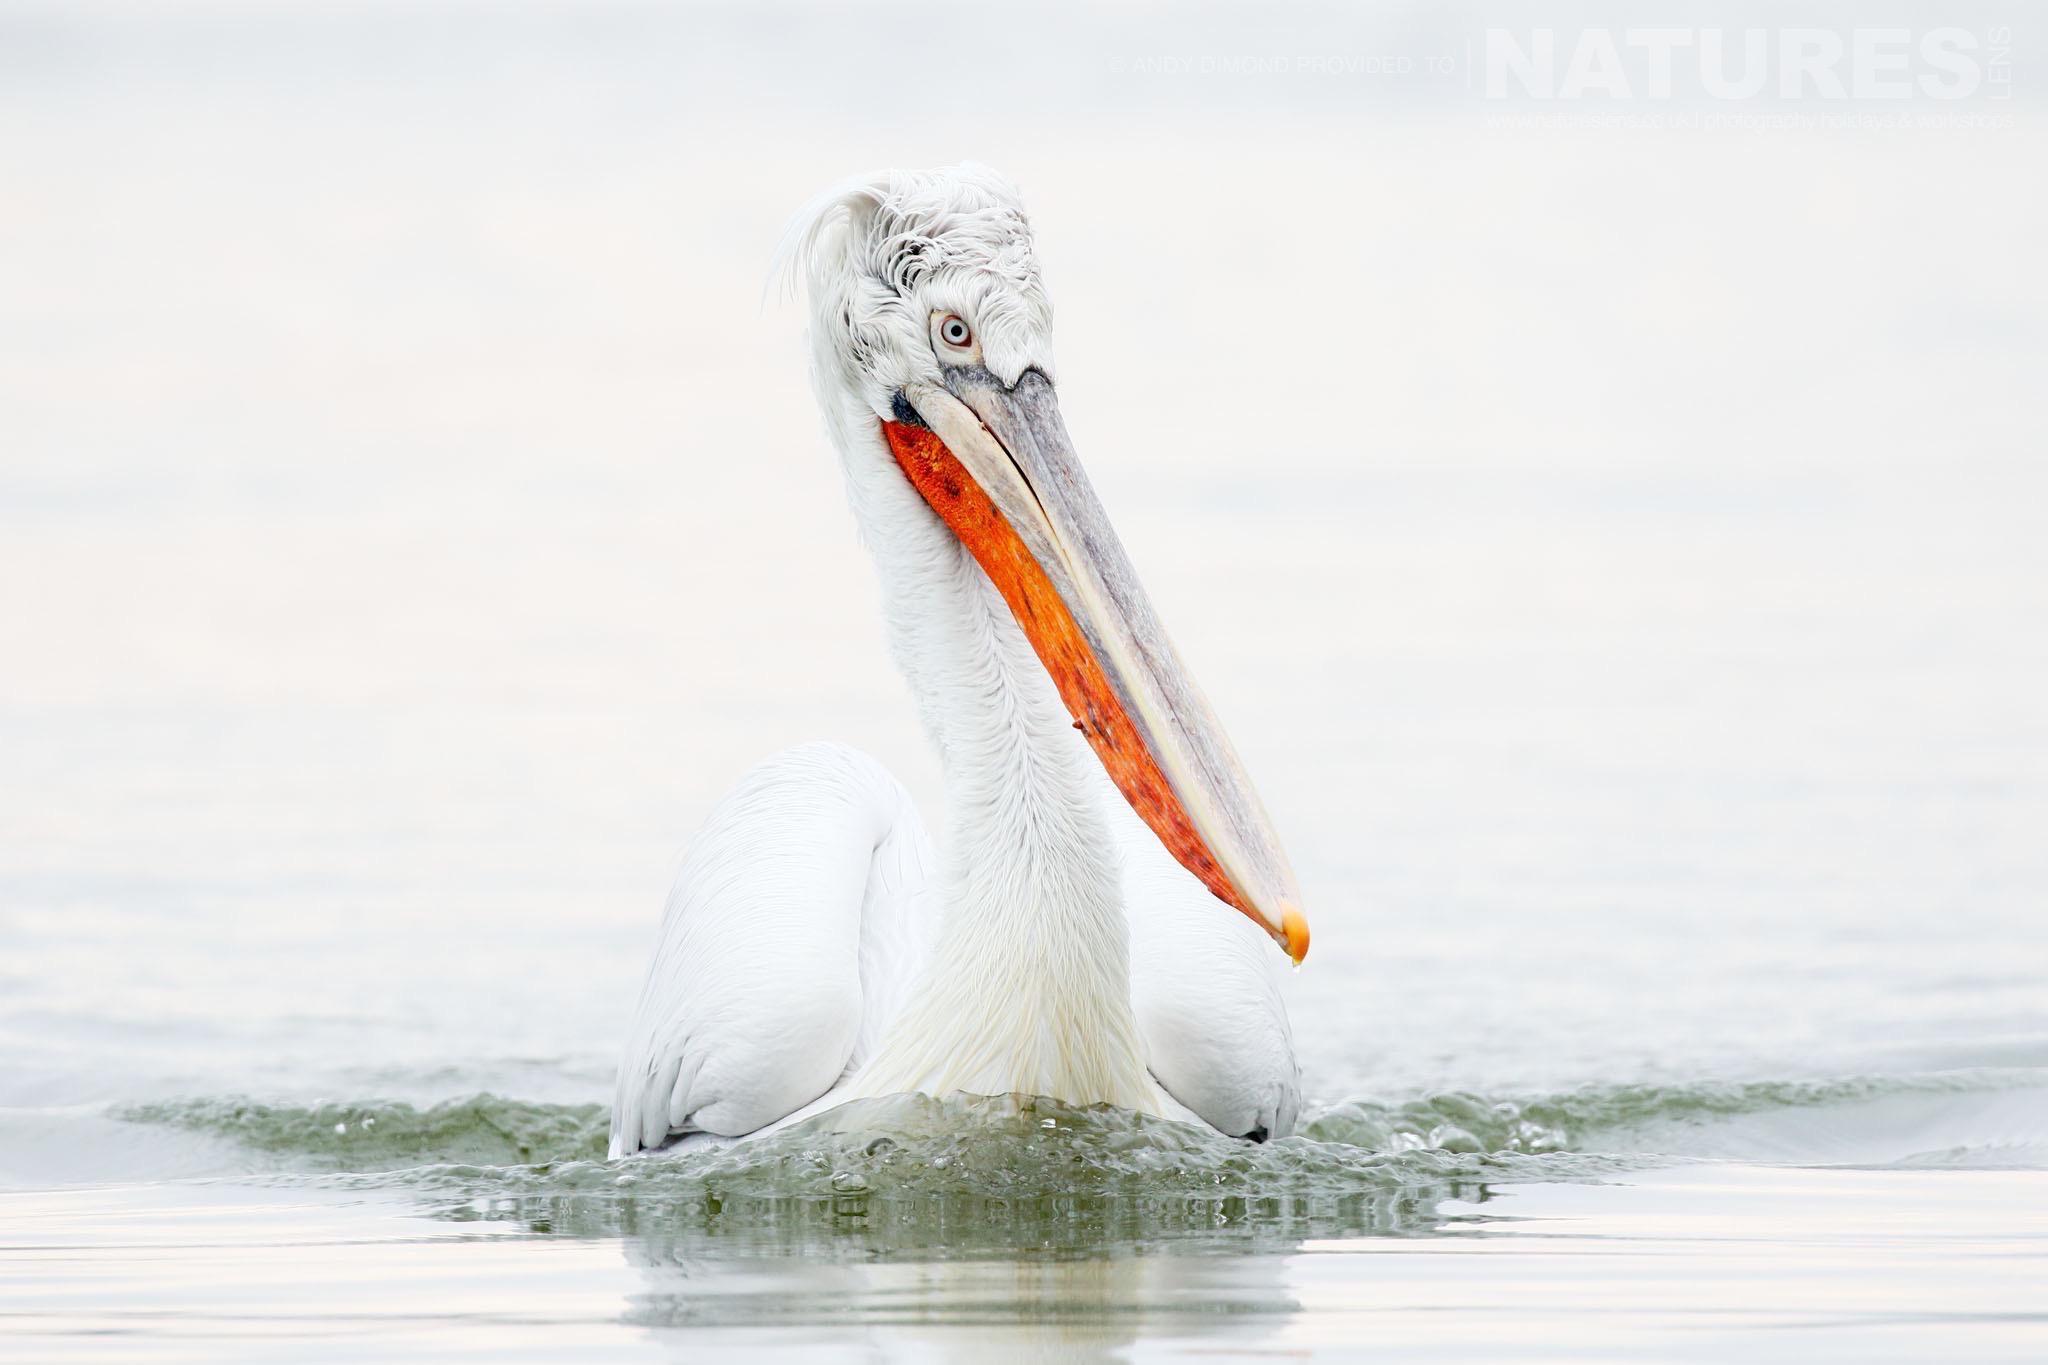 Coming in fast a Dalmatian Pelican pushes the water ahead of its chest photographed on the NaturesLens Dalmatian Pelicans Photography Holiday